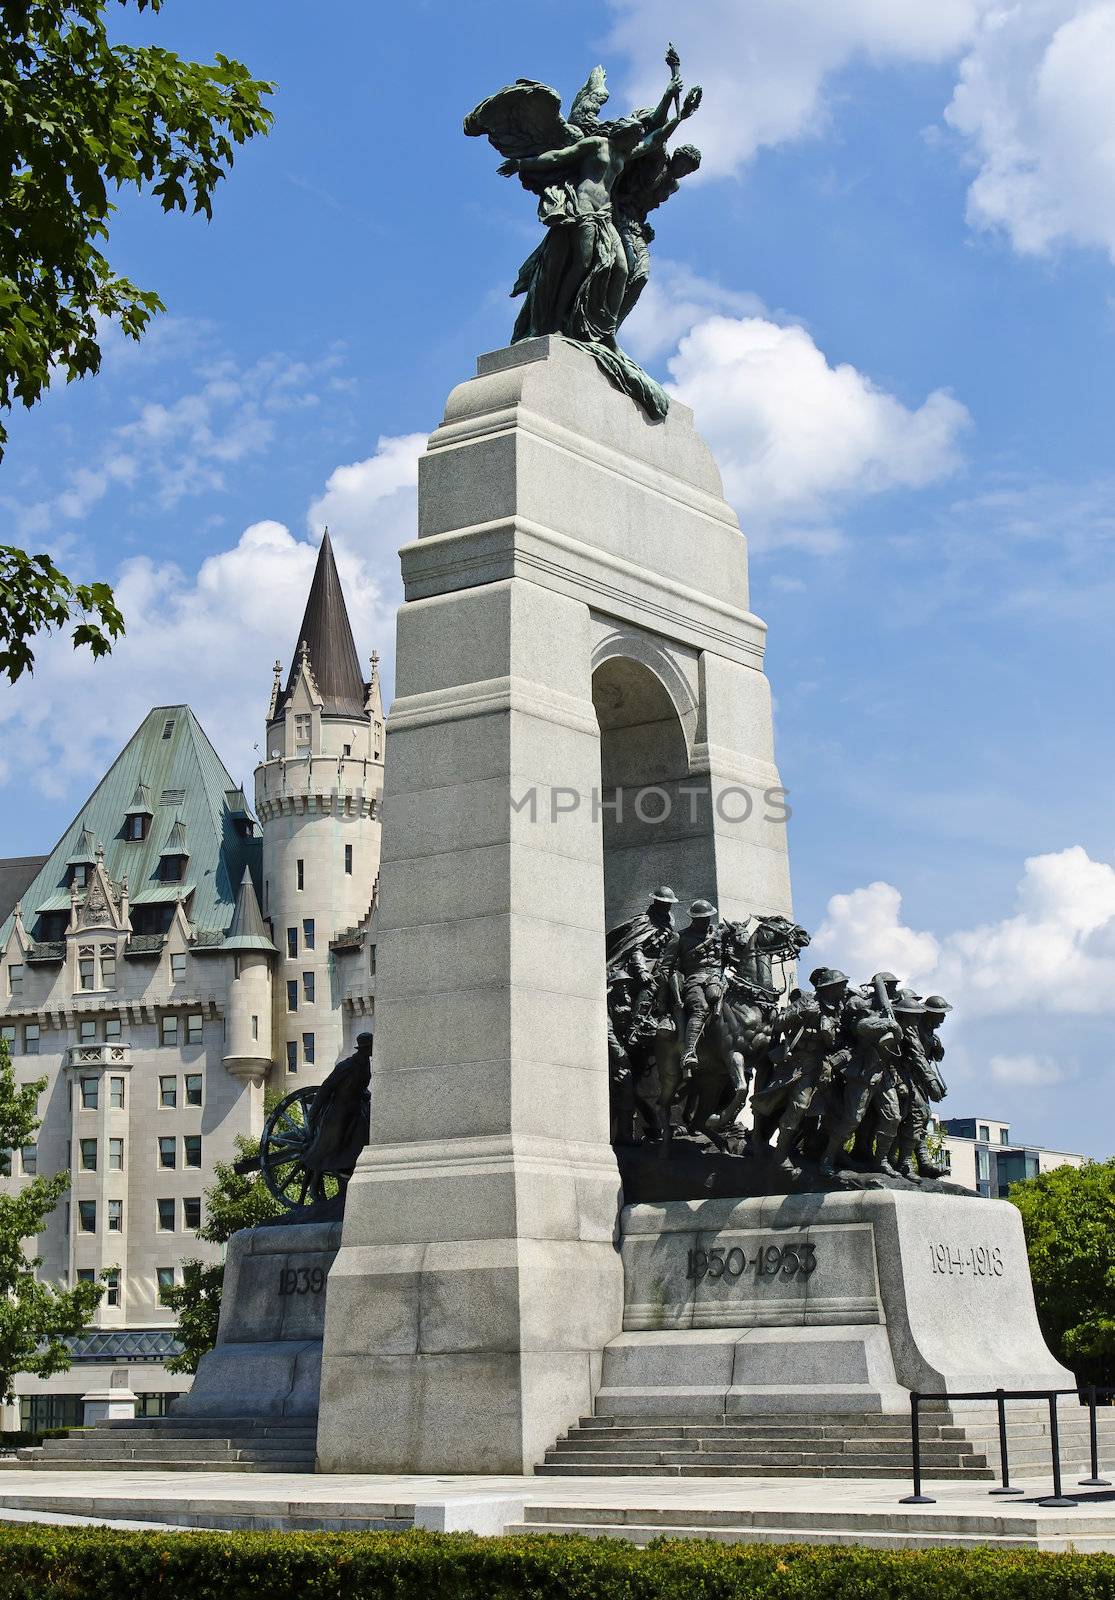 The National War Memorial (also known as The Response), is a granite cenotaph with bronze sculptures, that stands in Confederation Square, Ottawa, Canada and serves as the federal war memorial for Canada.